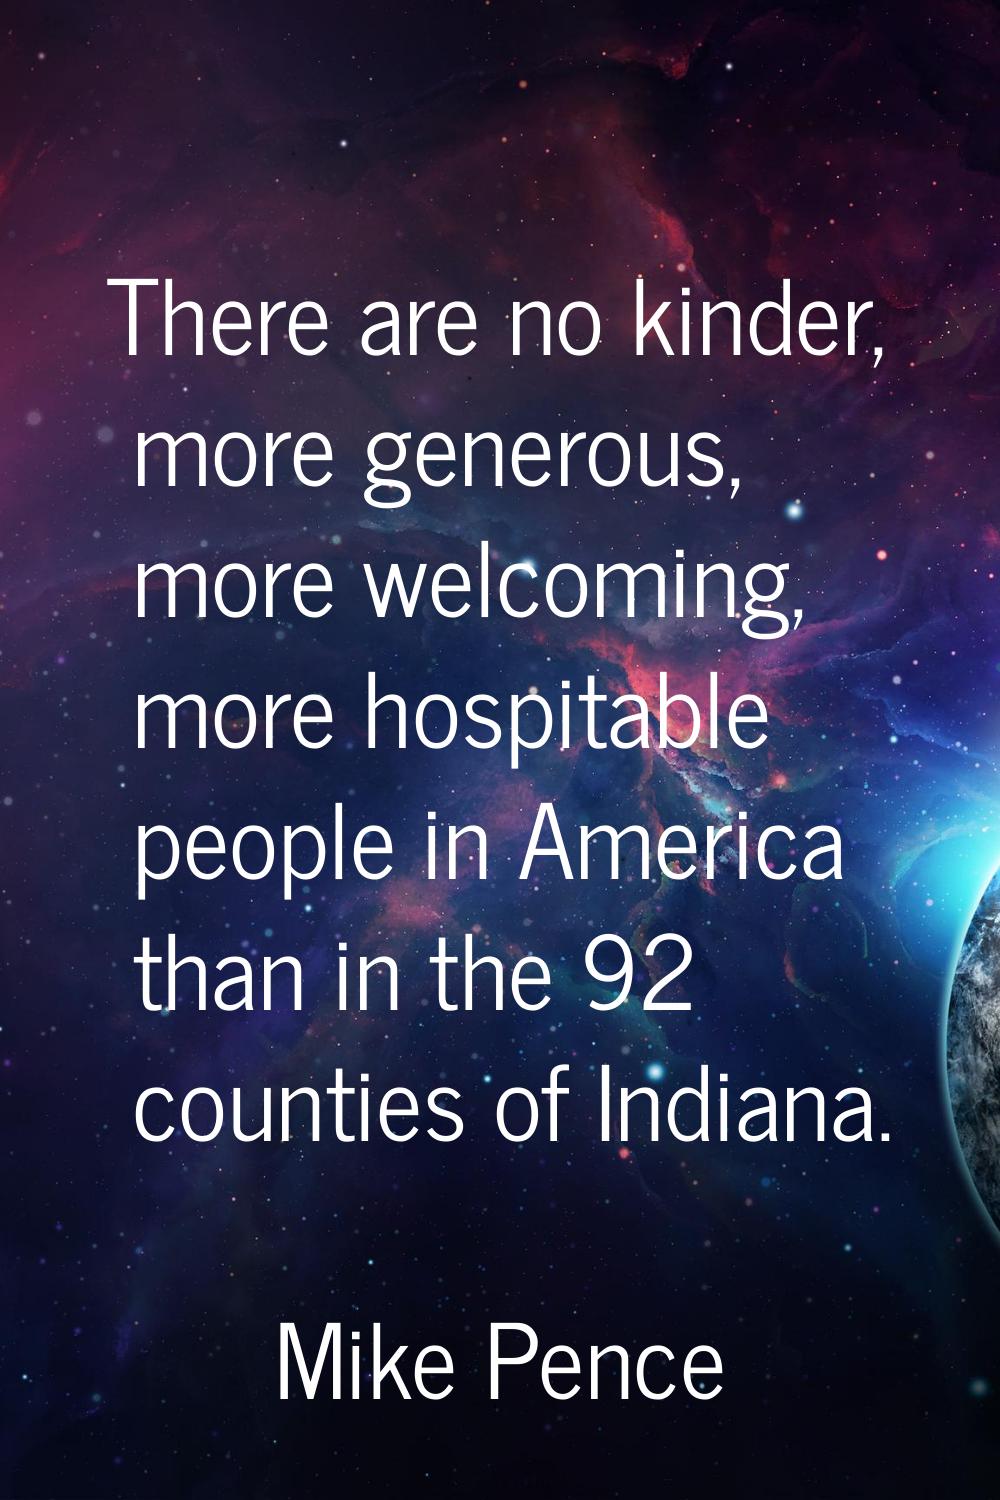 There are no kinder, more generous, more welcoming, more hospitable people in America than in the 9